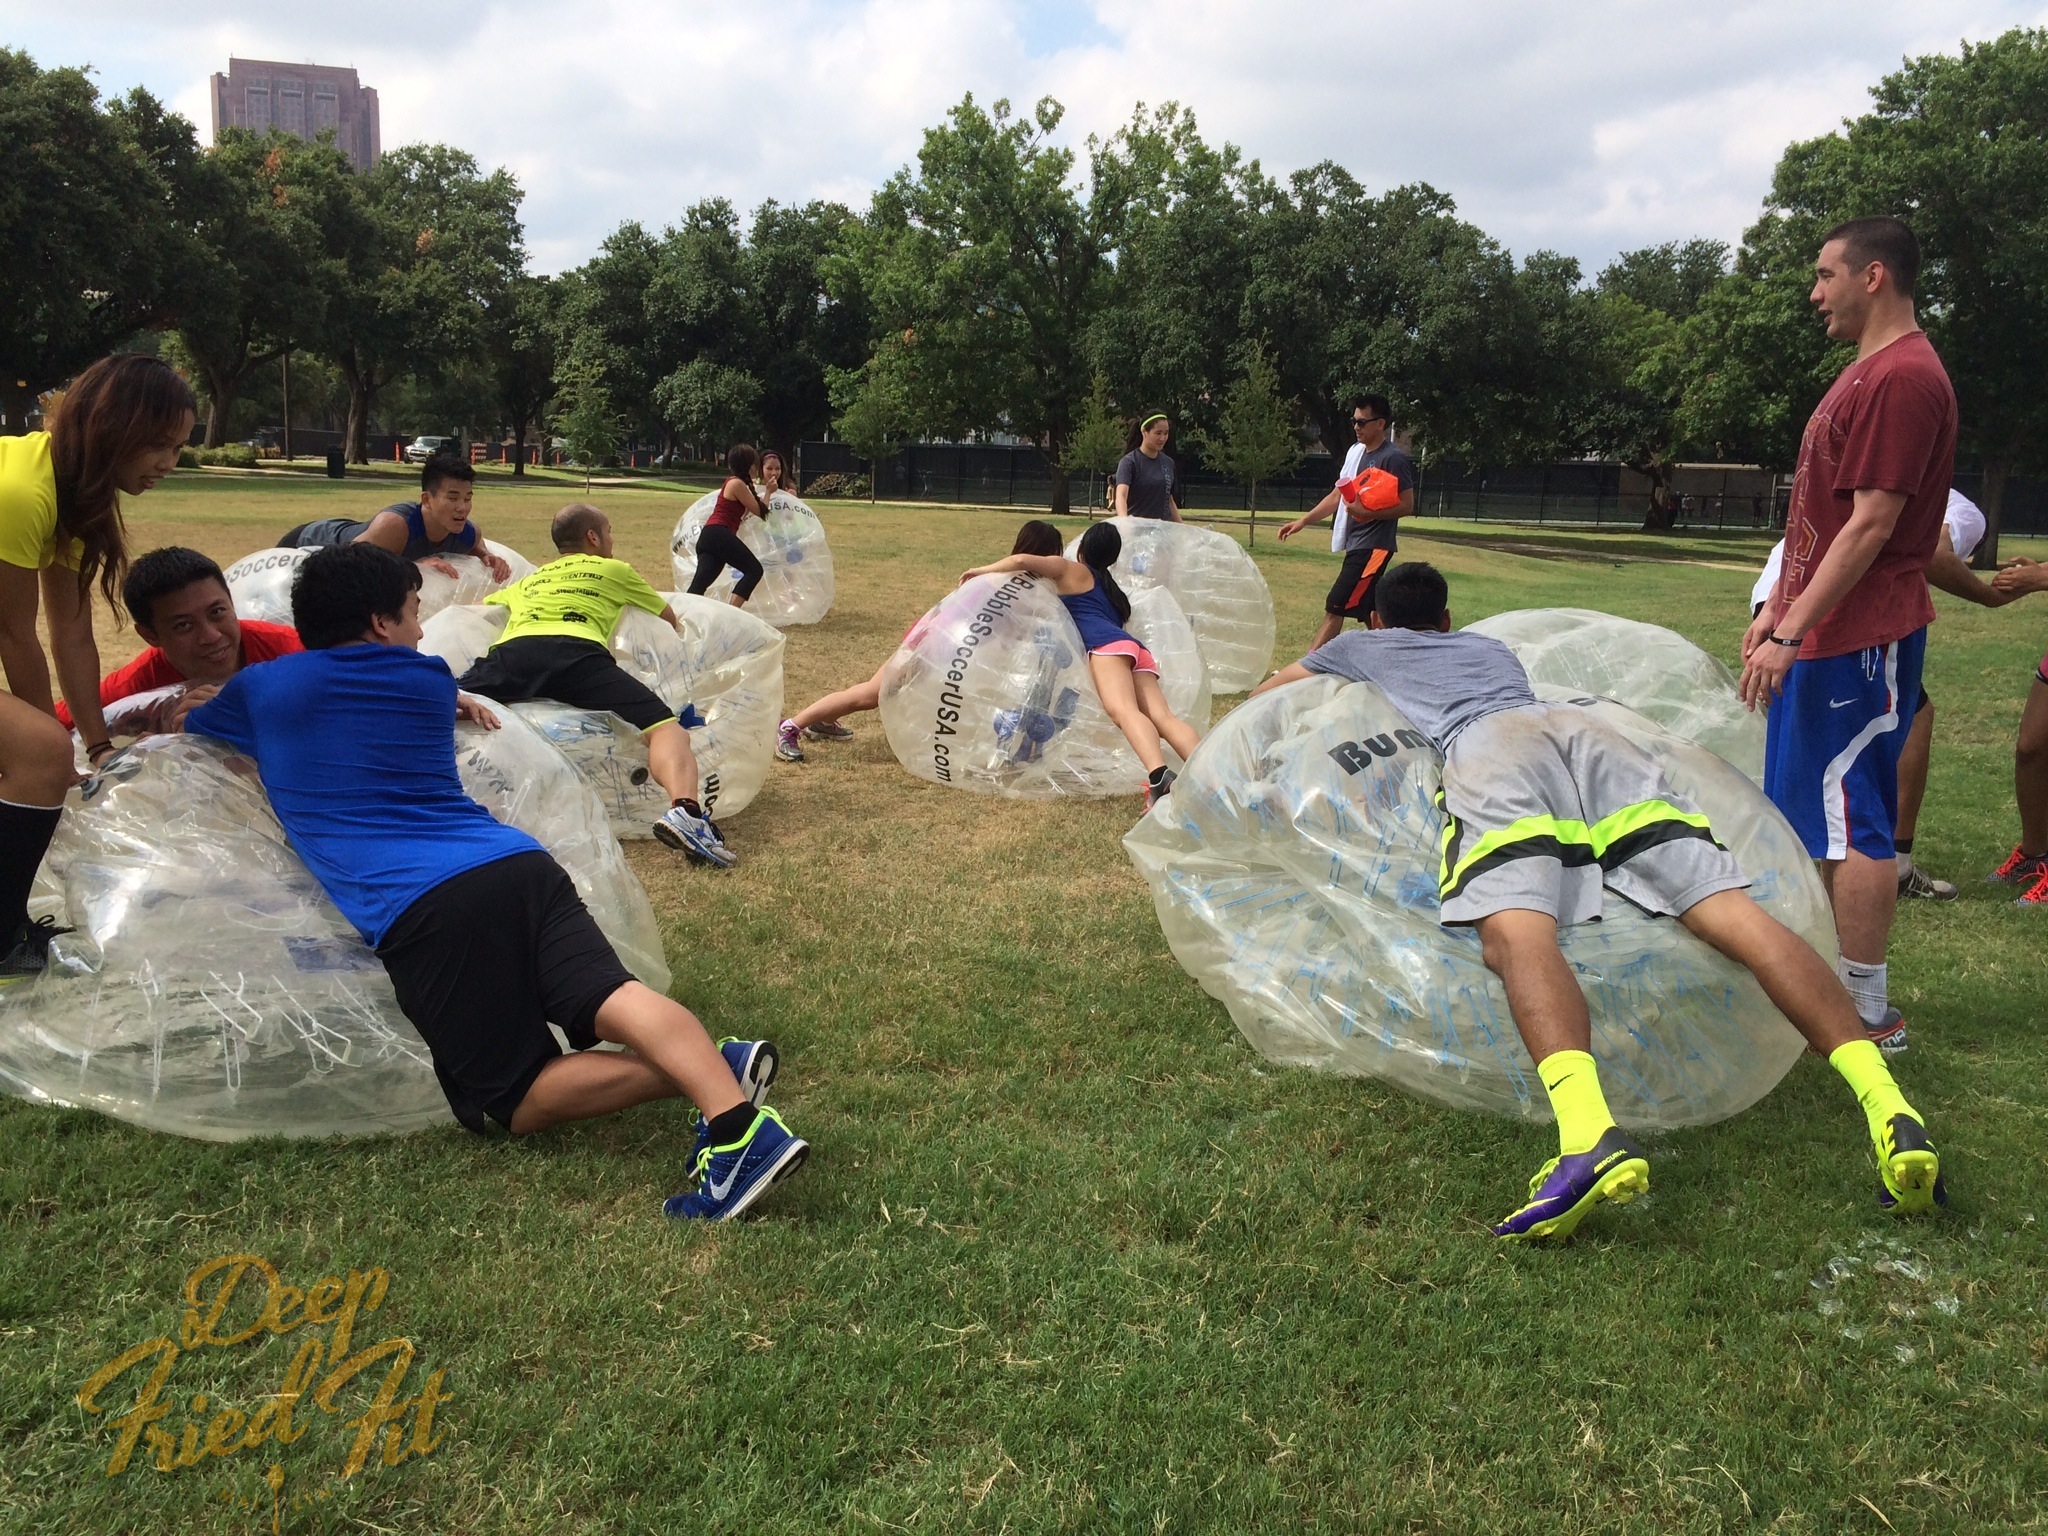 At the end, we helped deflate these bubbles. Resting on the bubble while the air is shooting out is very cooling. Photo Cred: Jessica Luong